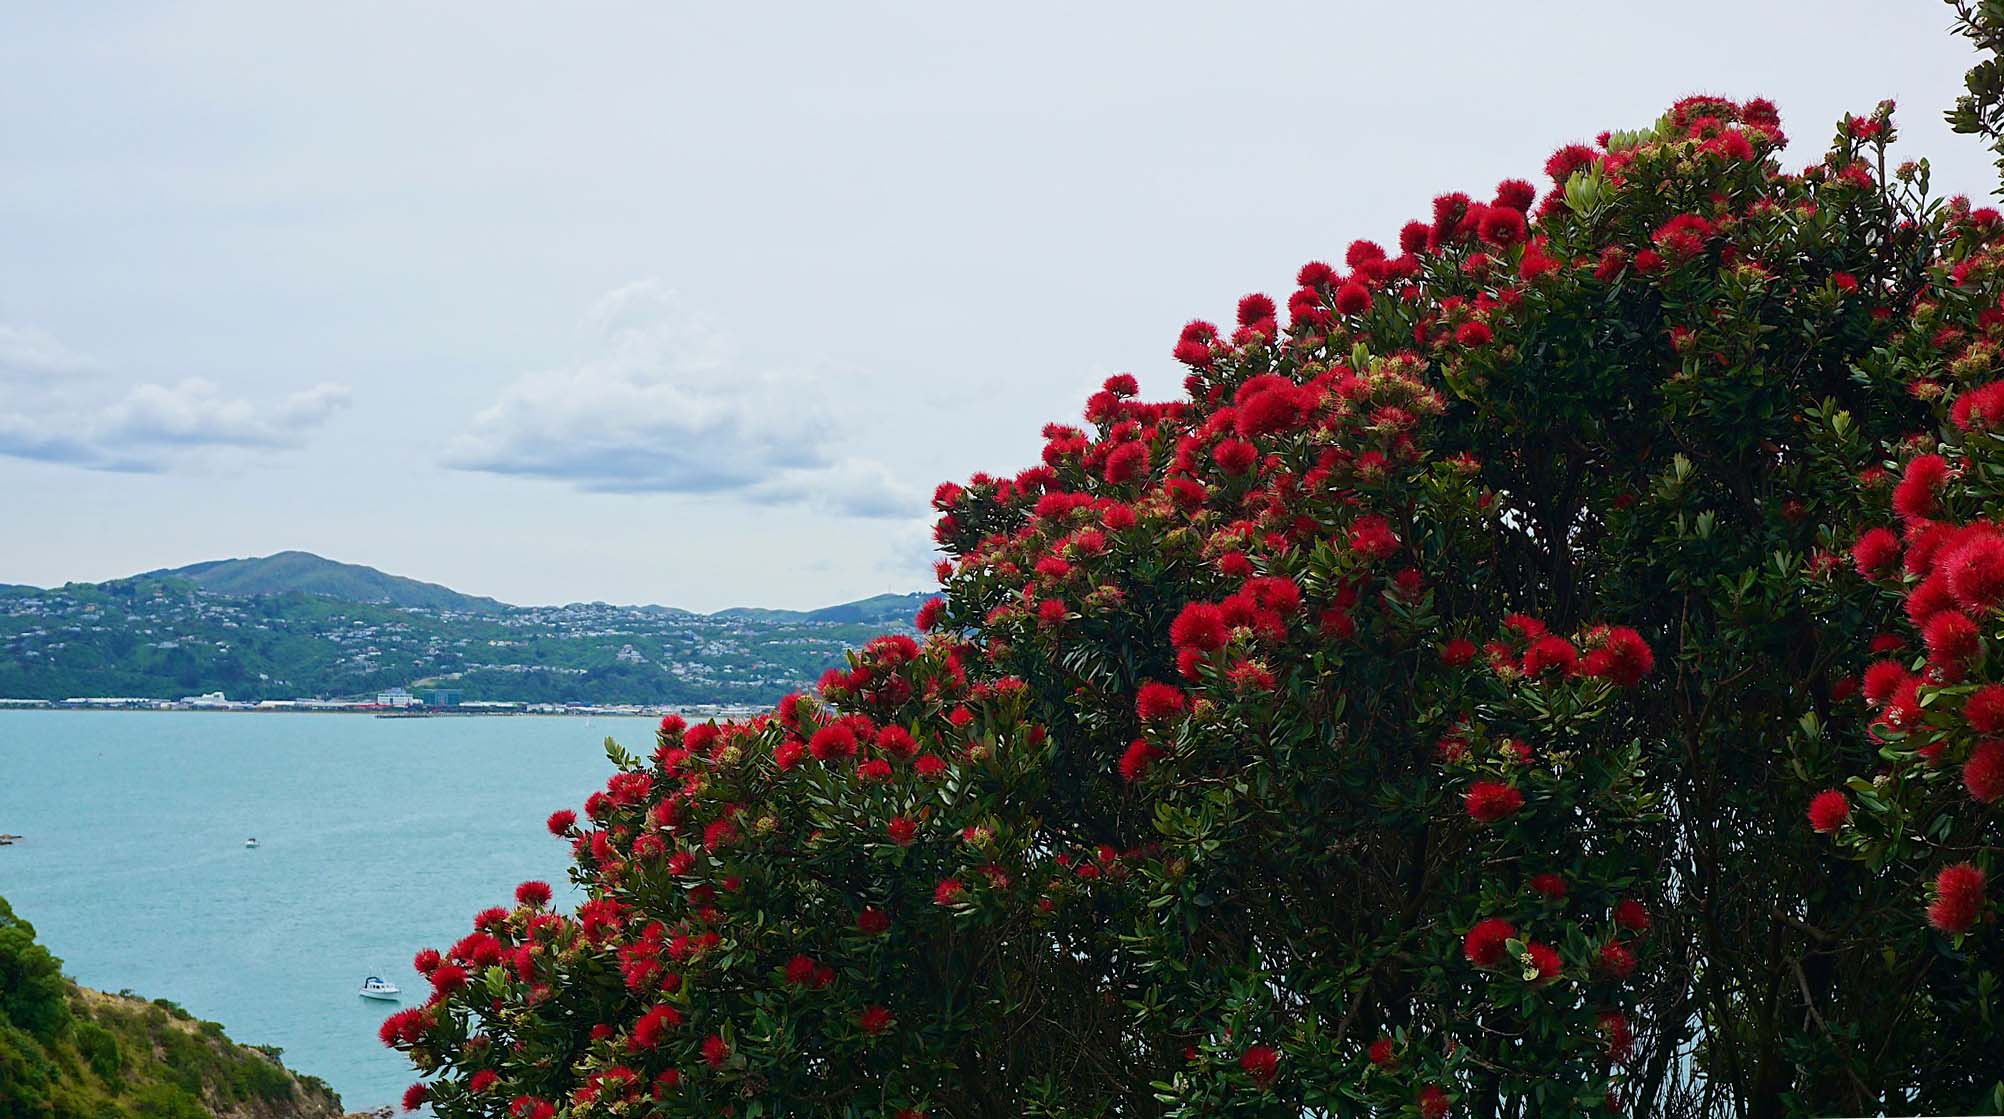 A pohutukawa in flower with water and hills in the background